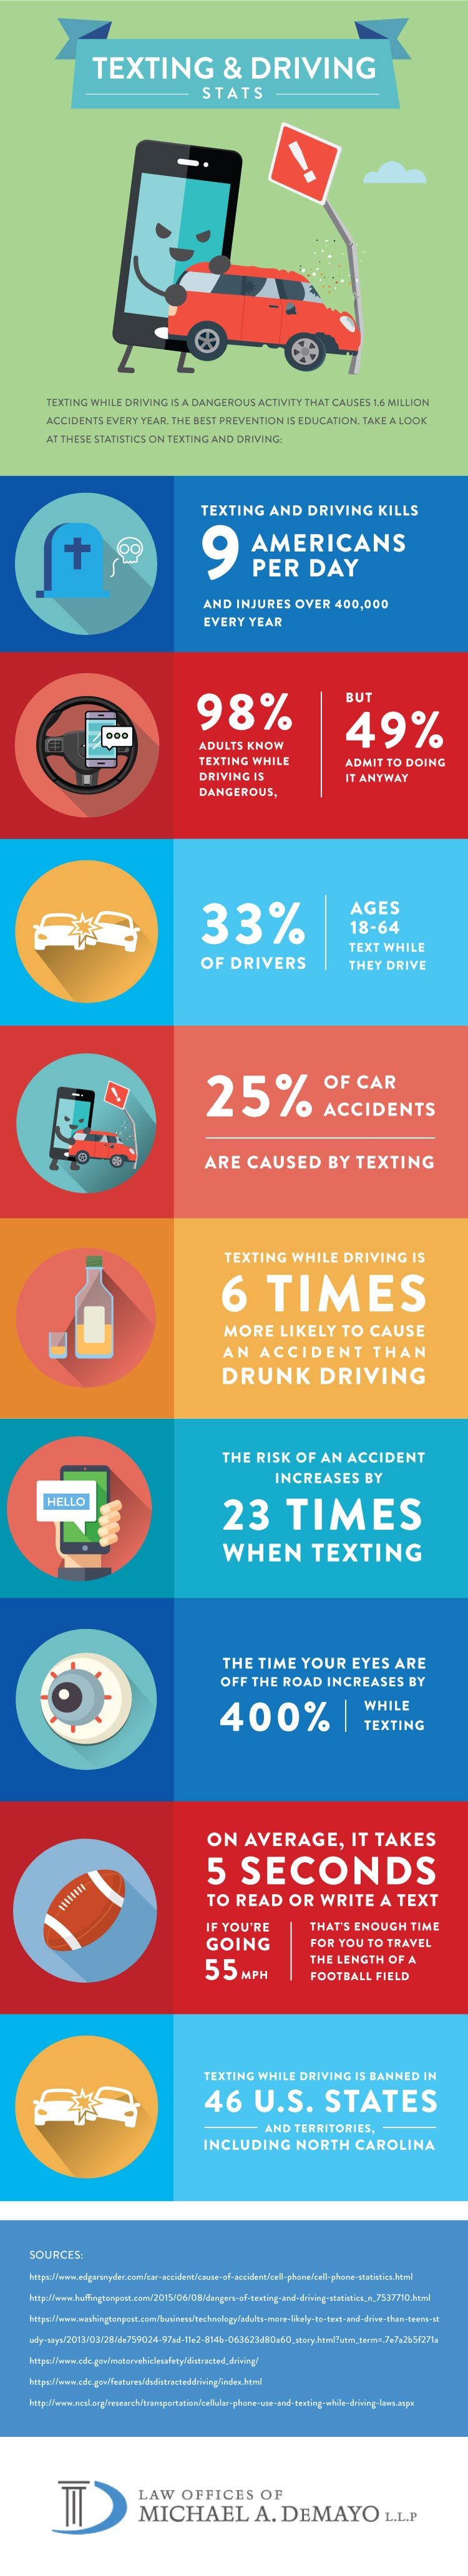 texting and driving statistics infographic